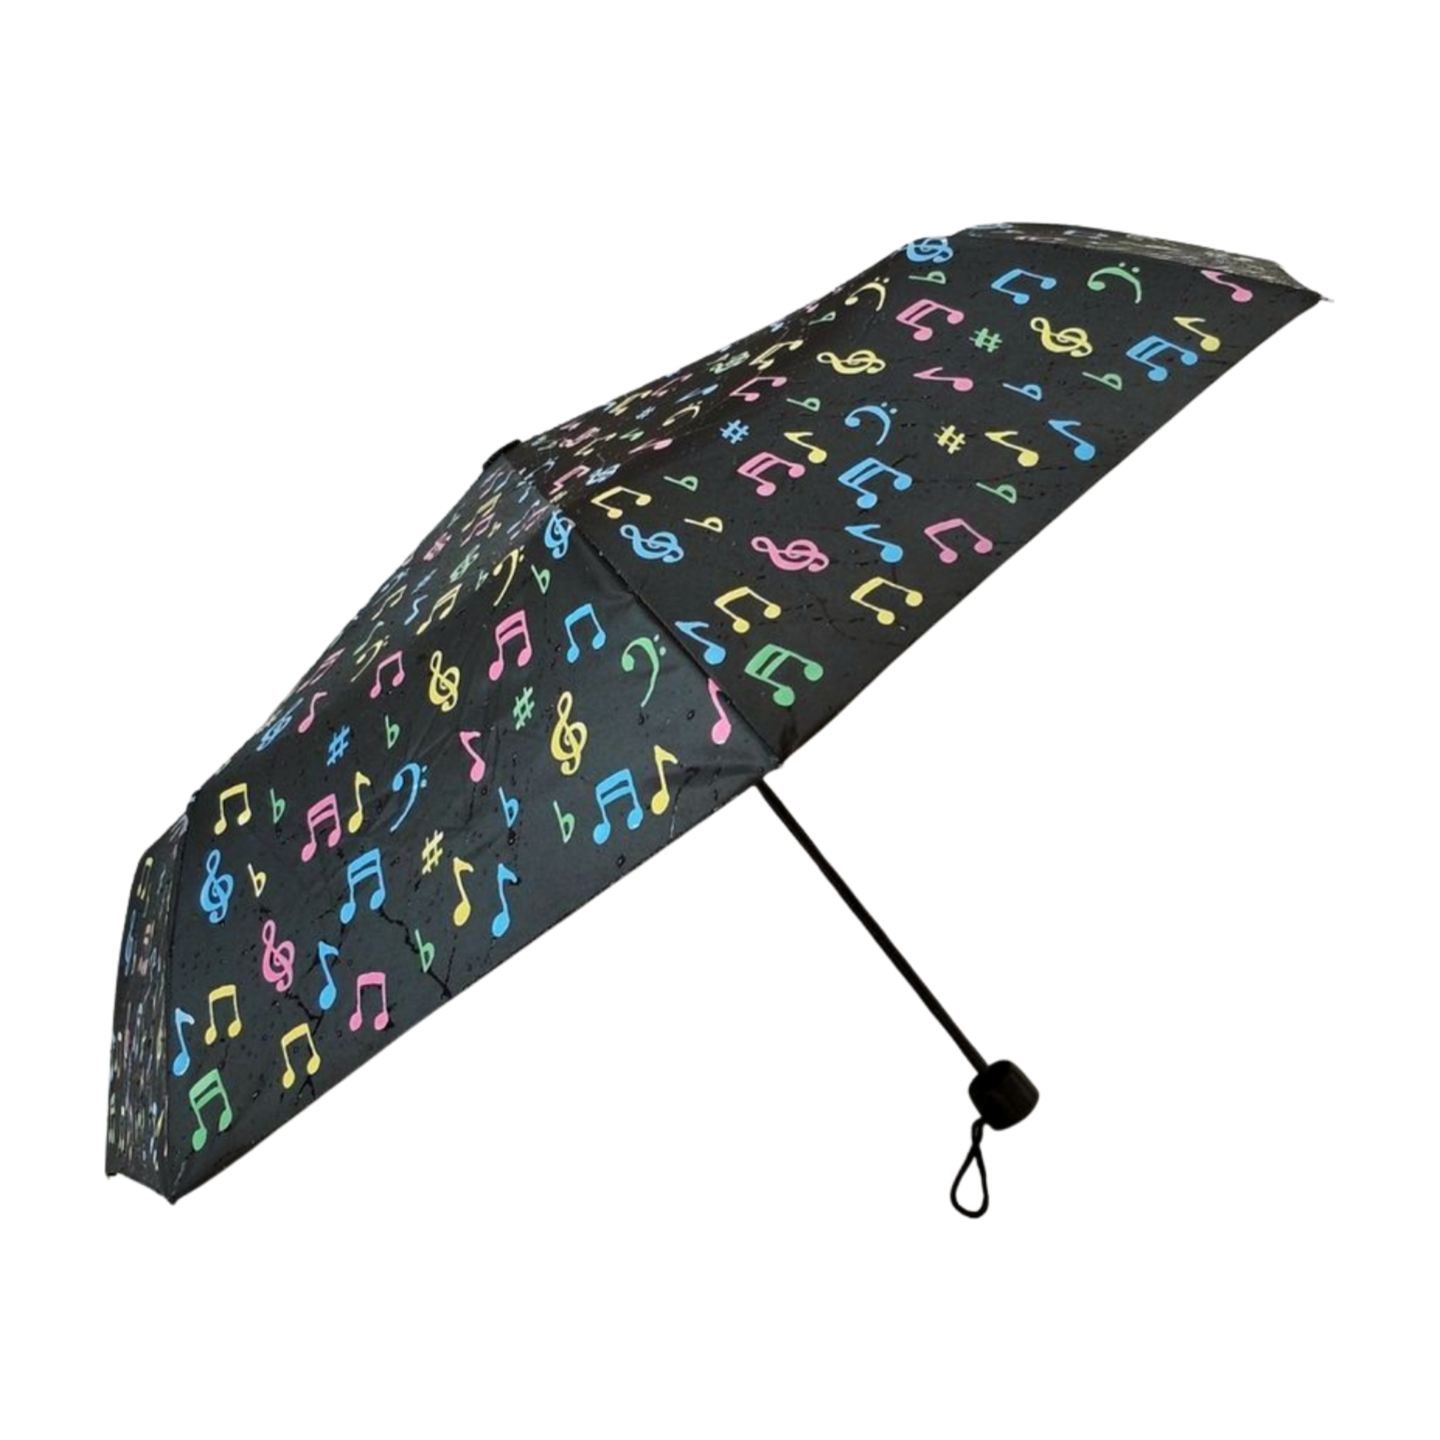 color changing folding umbrella, promotion gift umbrella, compact umbrella, small umbrella